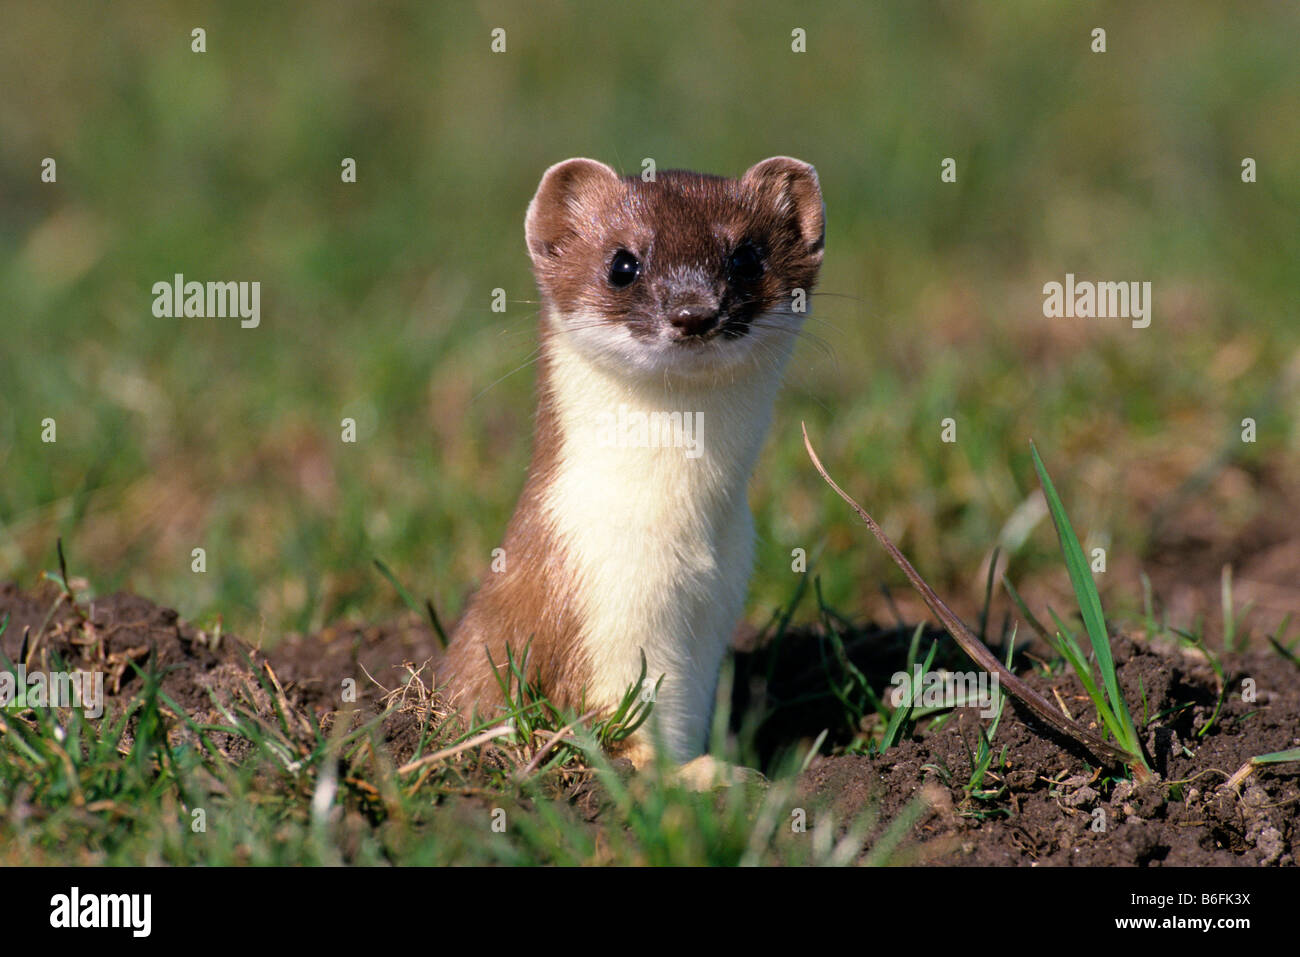 Ermine or Stoat or Short-tailed Weasel (Mustela erminea) in its summer coat Stock Photo